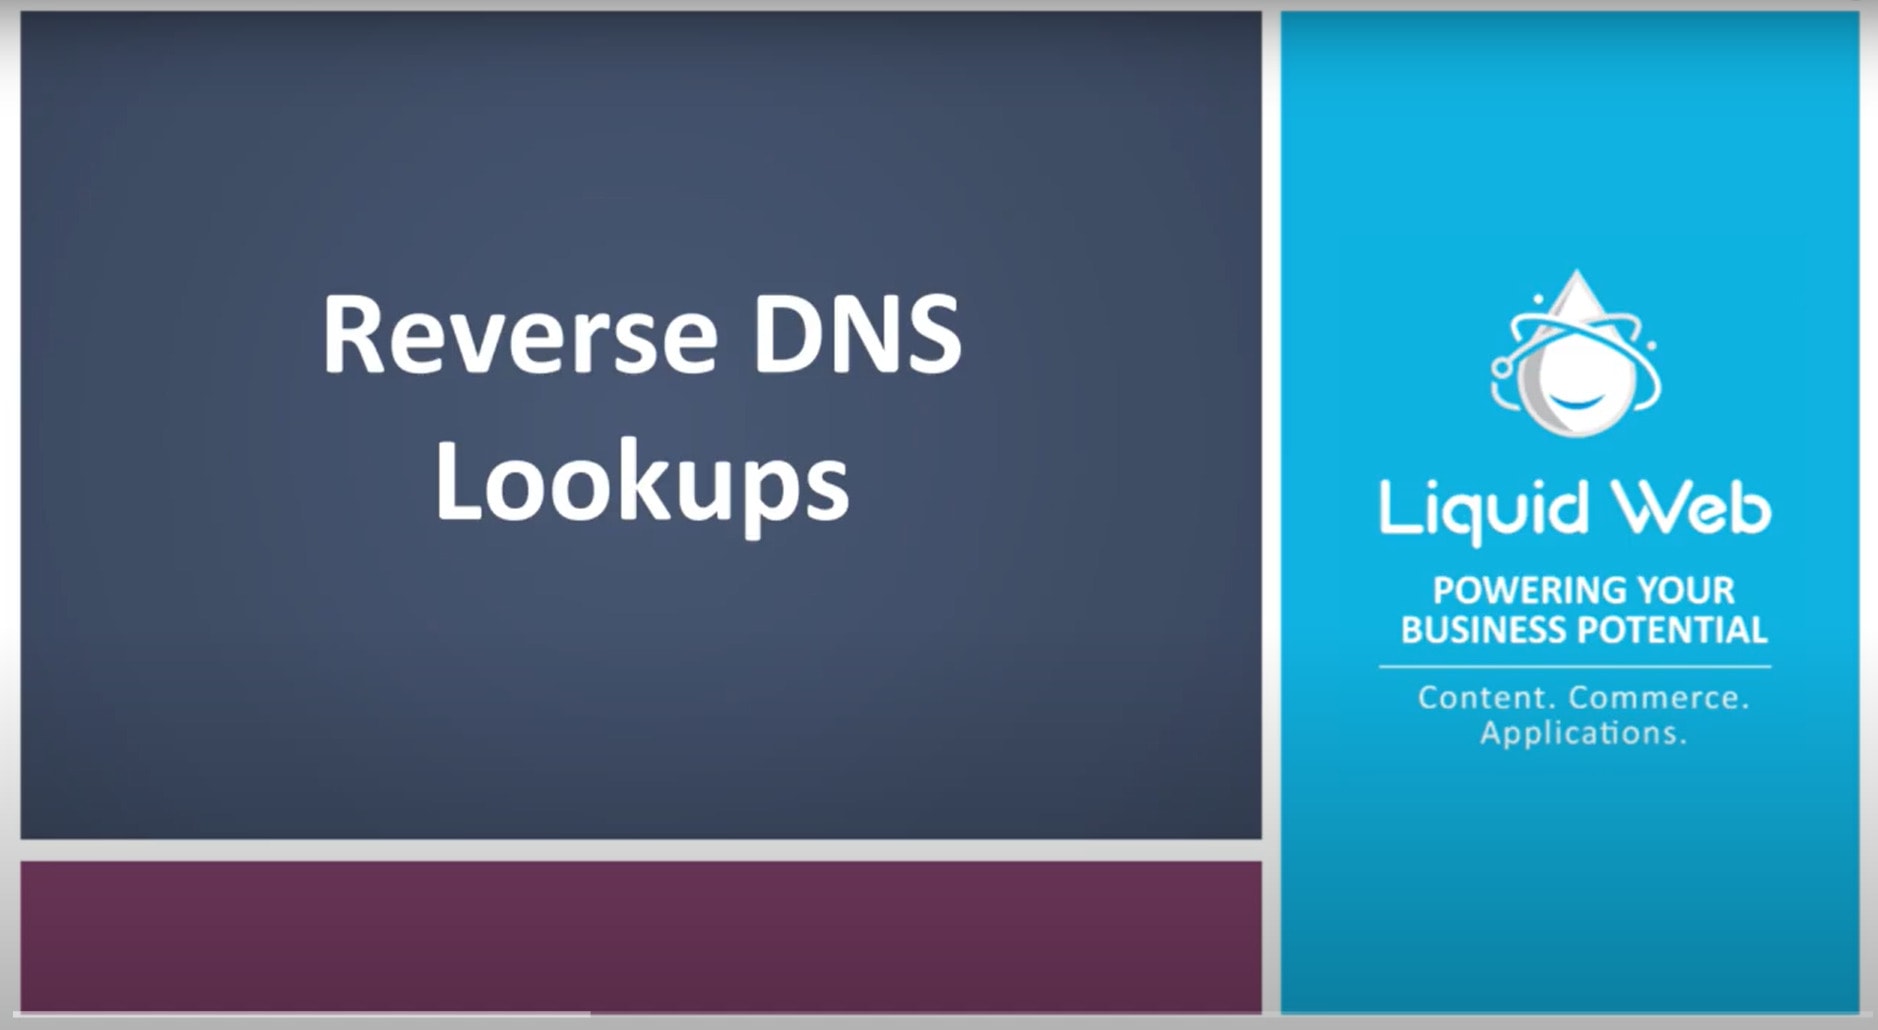 How to Perform a Reverse DNS Lookup